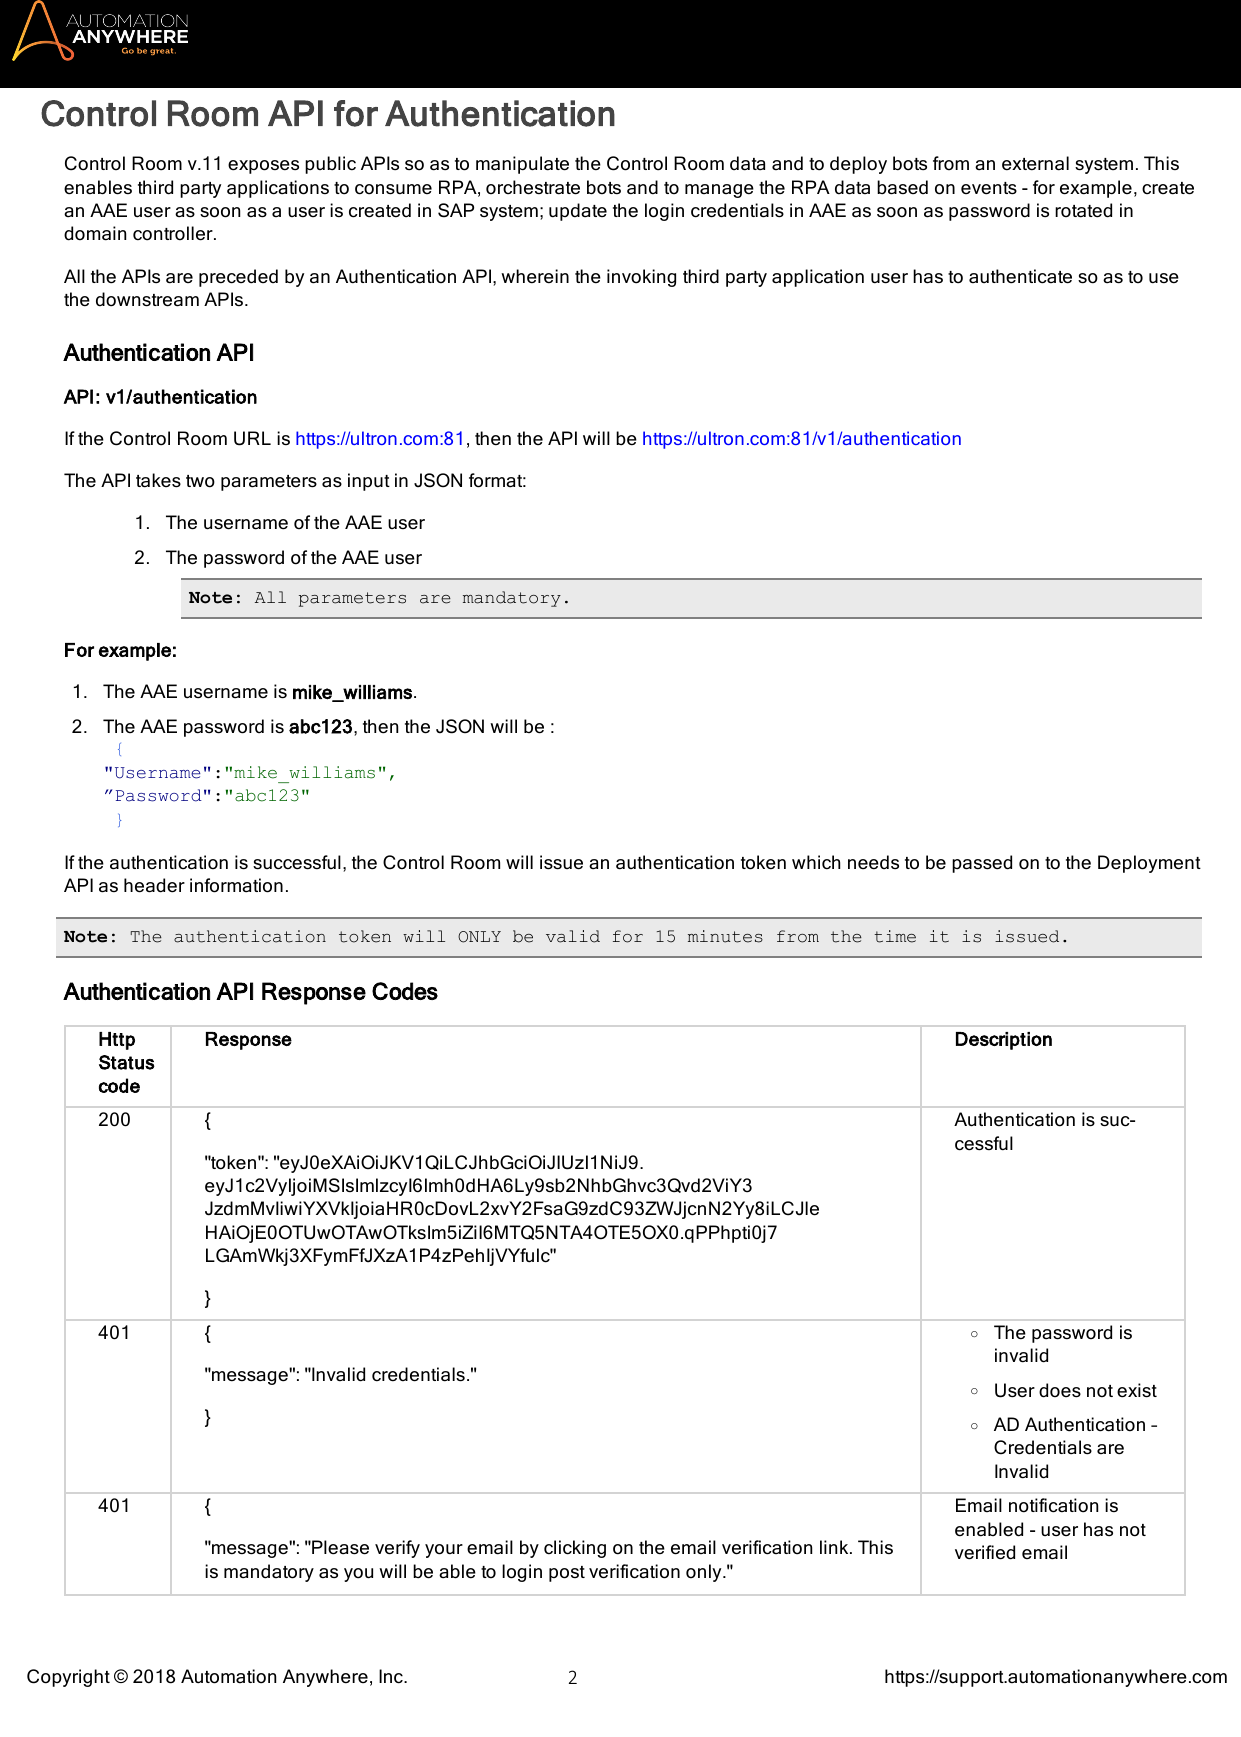 Page 2 of 12 - Automation Anywhere Enterprise Control Room APIs AAE 11 LTS CR API Guide